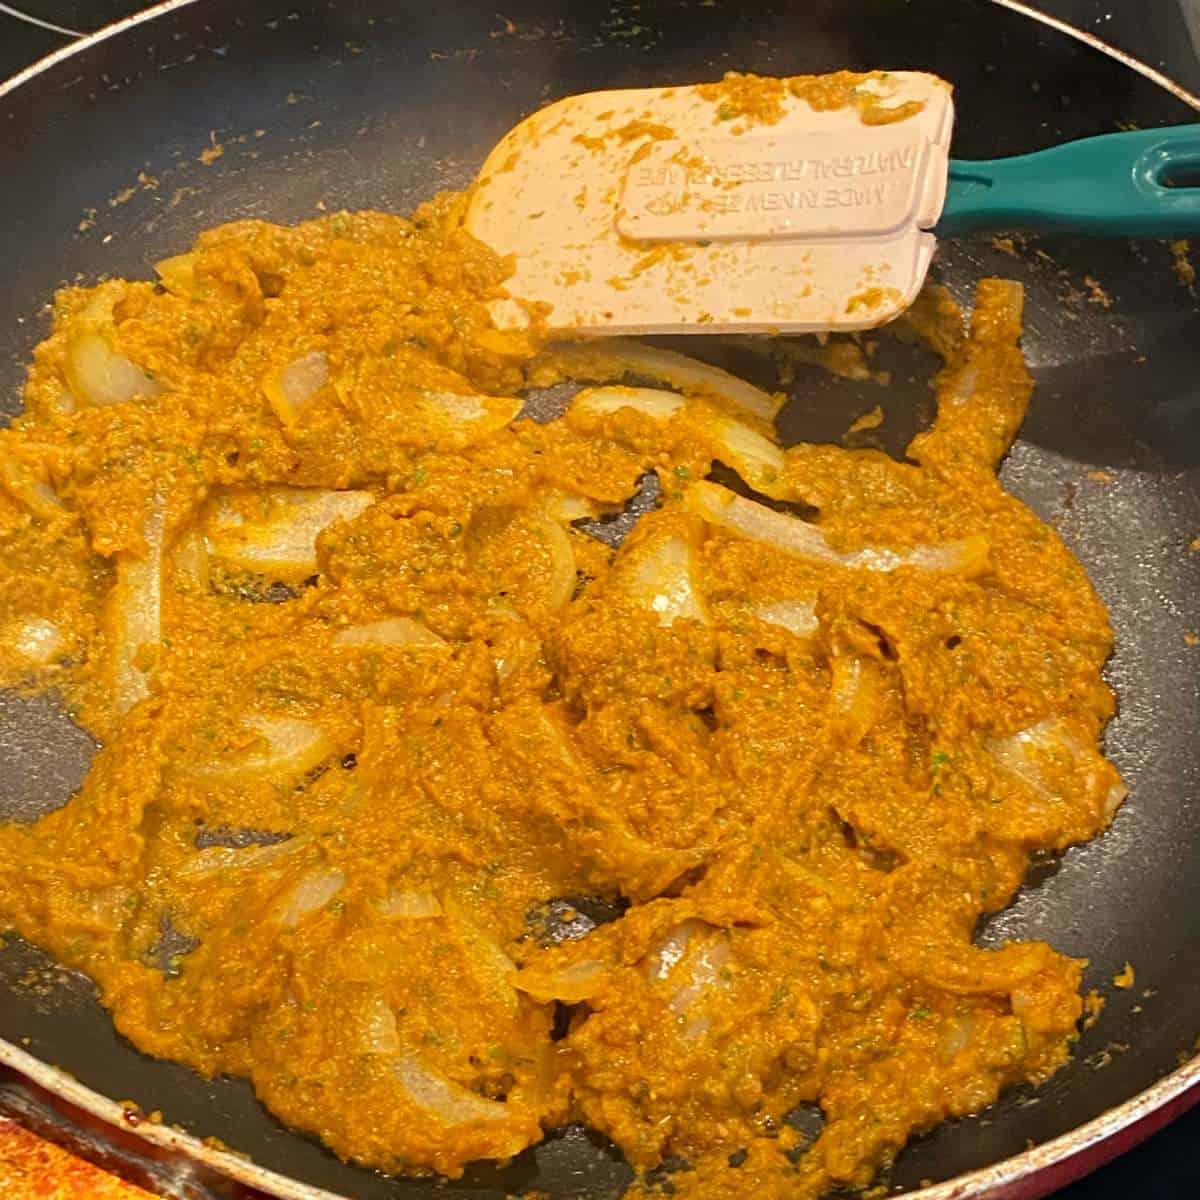 The spice mix and onion gently frying in a fry pan for the paneer curry